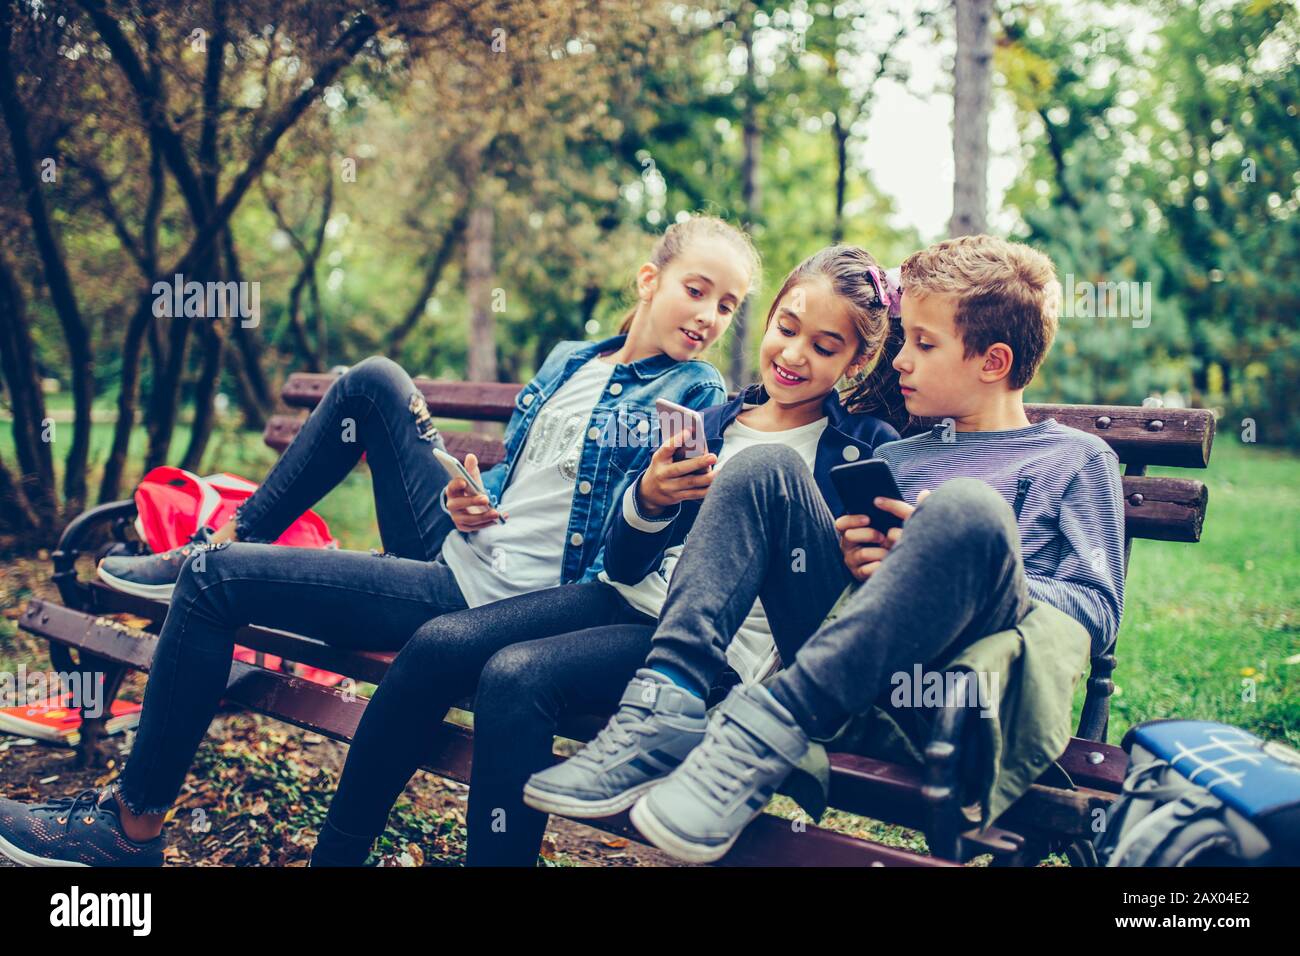 Group of friends playing video games on smart phone after school while sitting on the bench in the park. Stock Photo